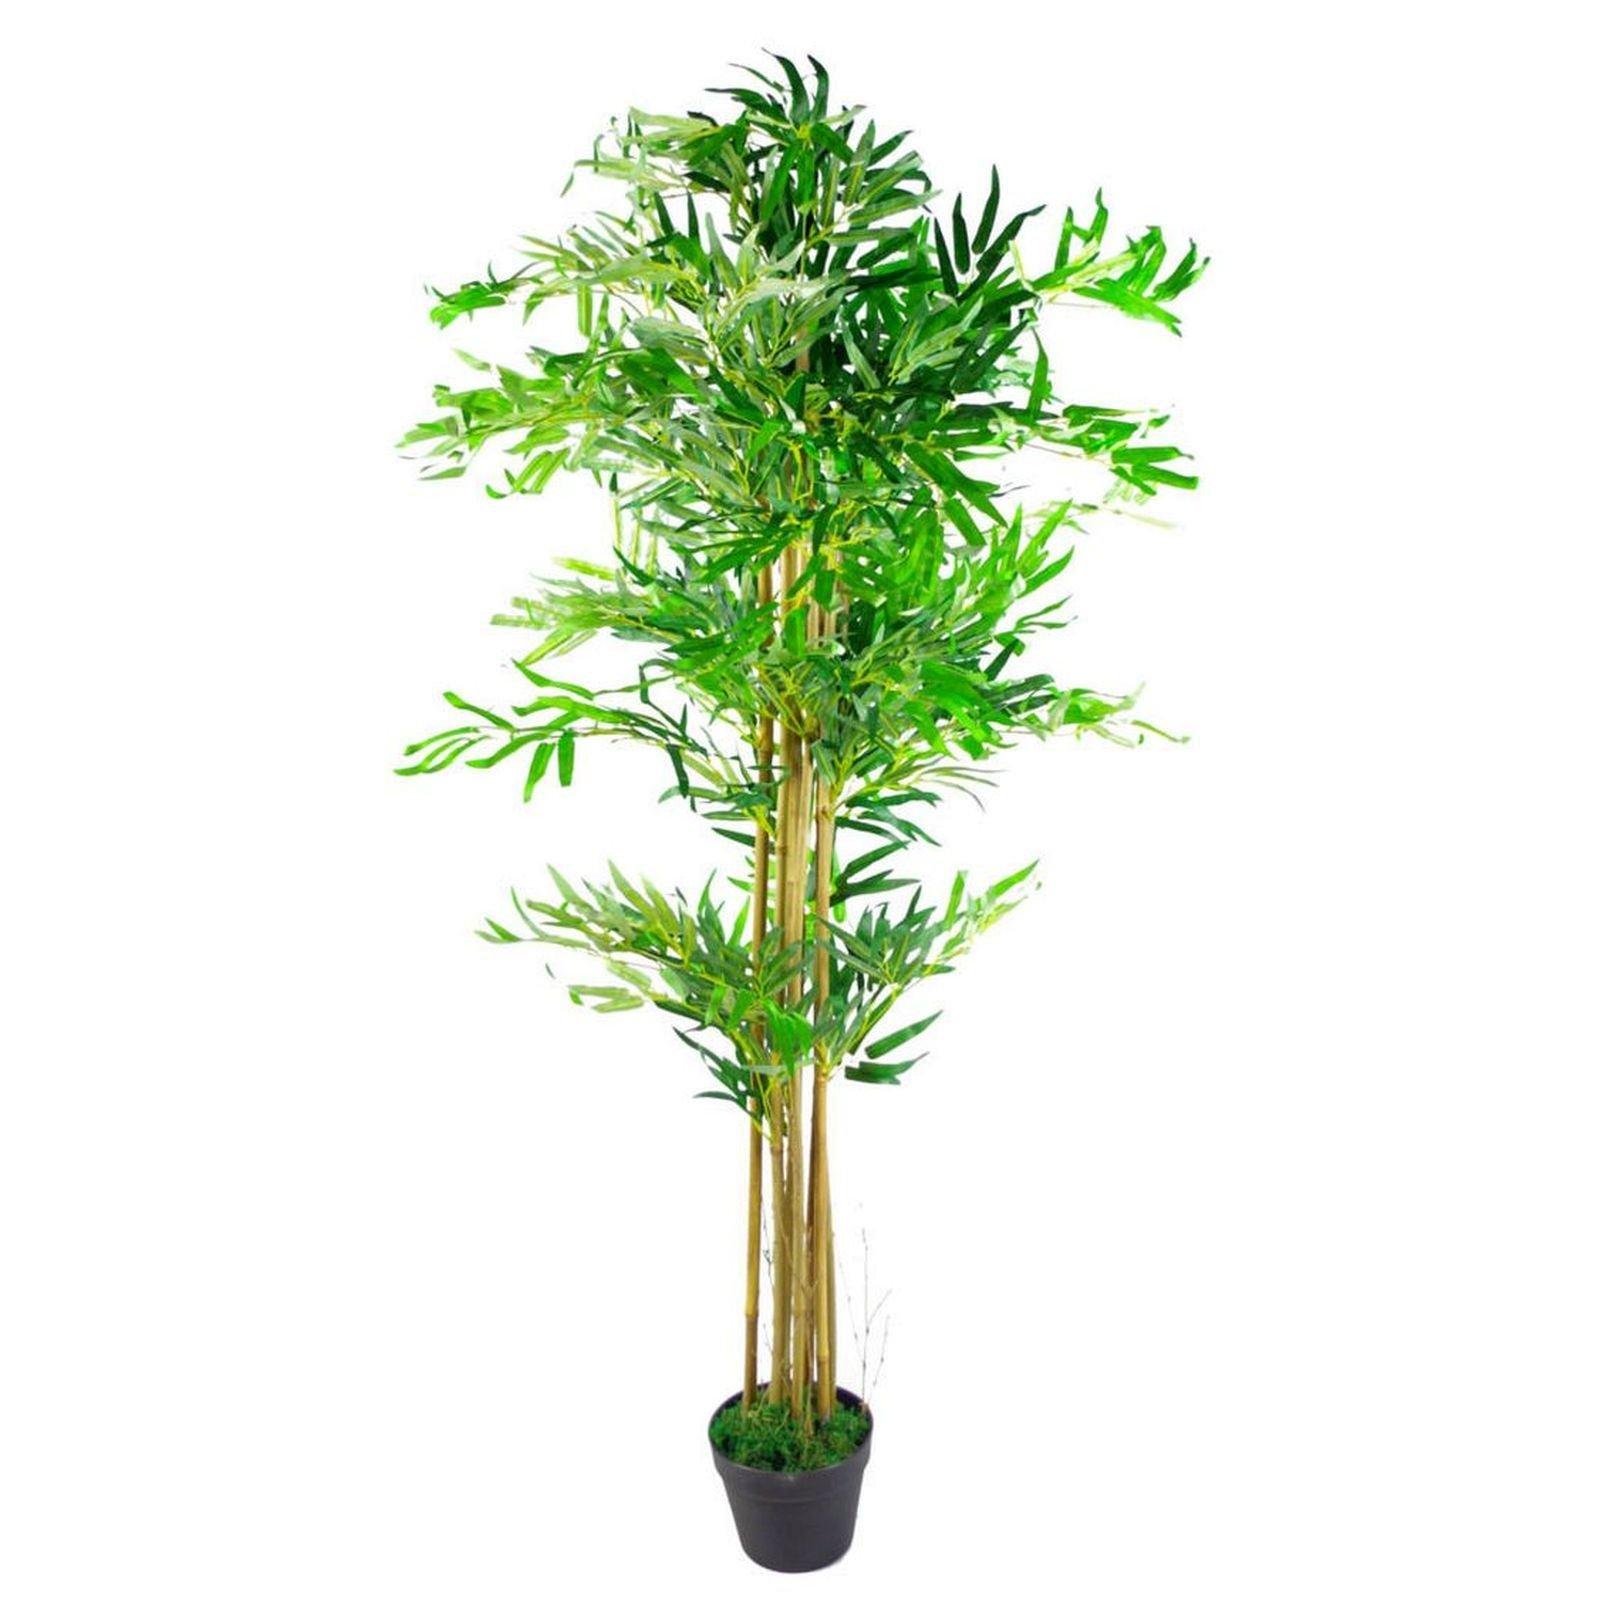 150cm Leaf Design UK Realistic Artificial Bamboo Plants / Trees